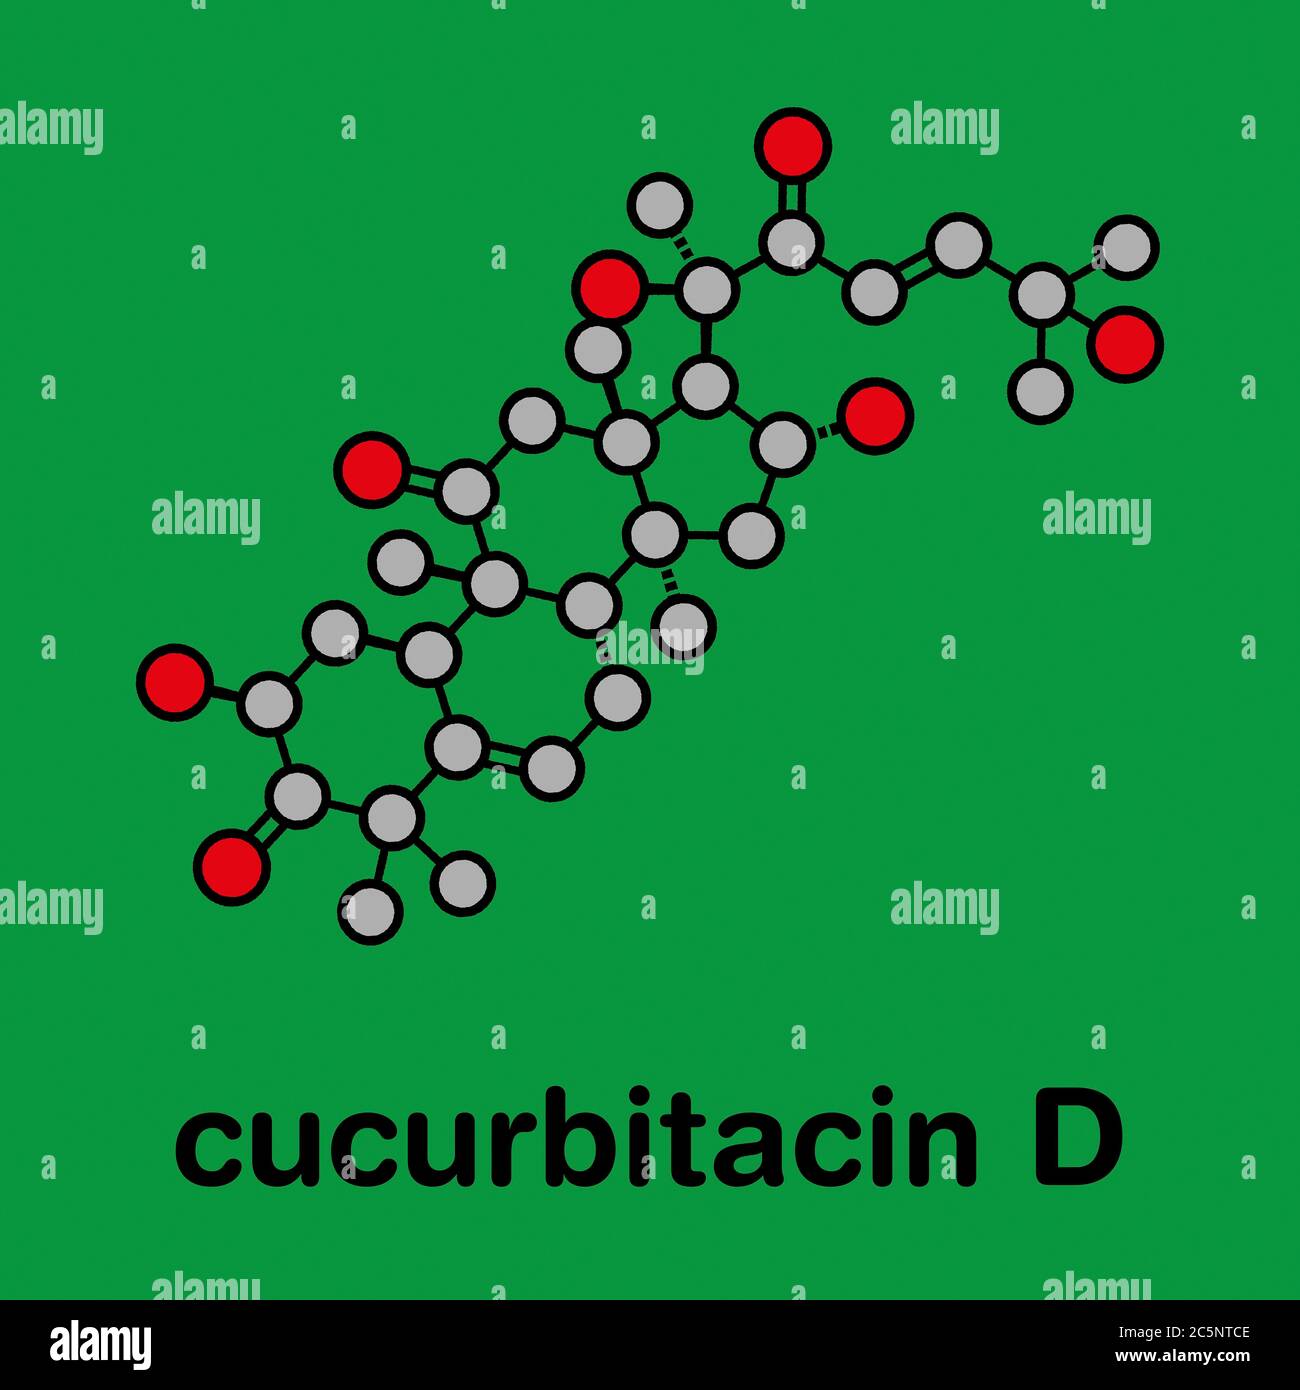 Cucurbitacin D bitter molecule. Stylized skeletal formula (chemical structure): Atoms are shown as color-coded circles: hydrogen (hidden), carbon (grey), oxygen (red). Stock Photo